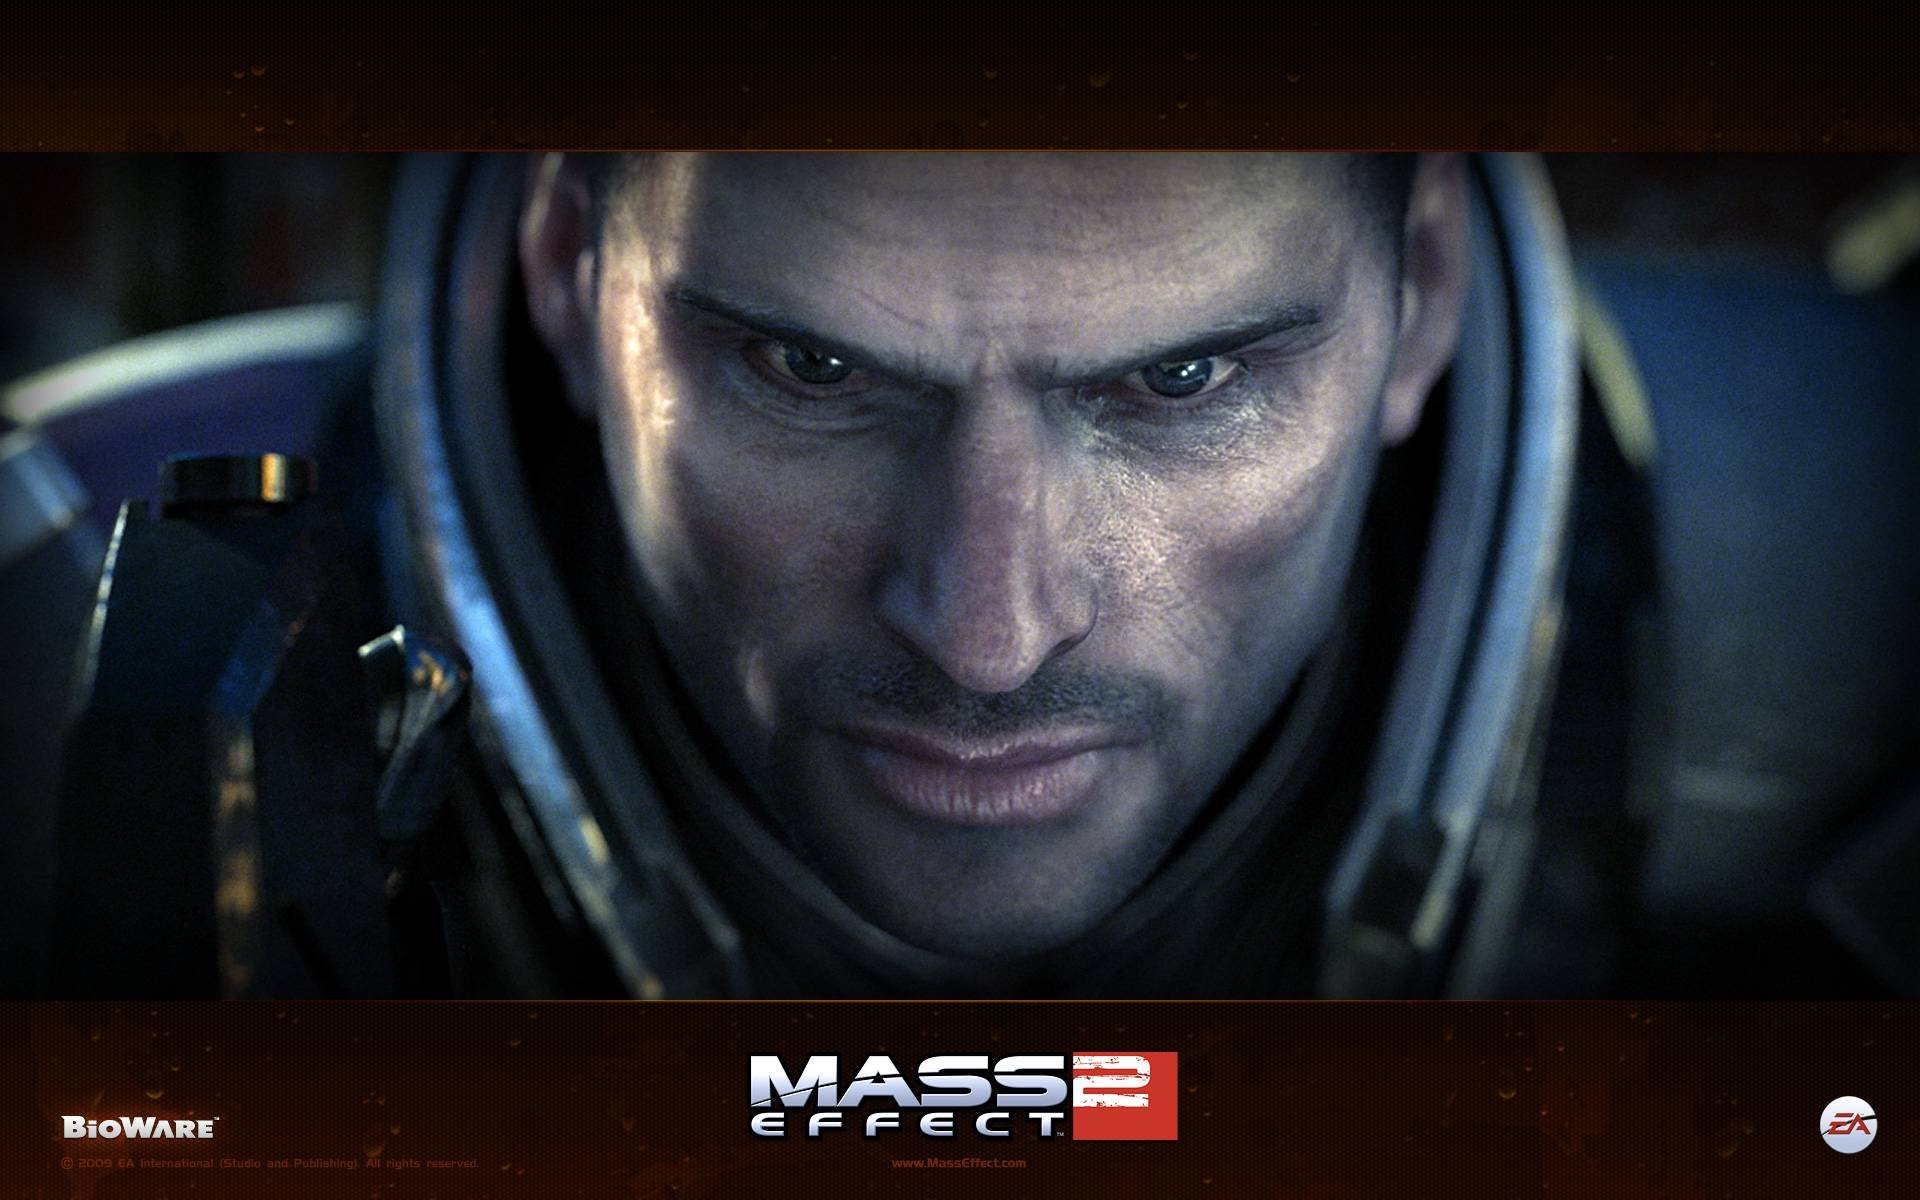 mass, Effect, Sci fi, Futuristic, Shooter, Action, Fighting, Warrior, Poster Wallpaper